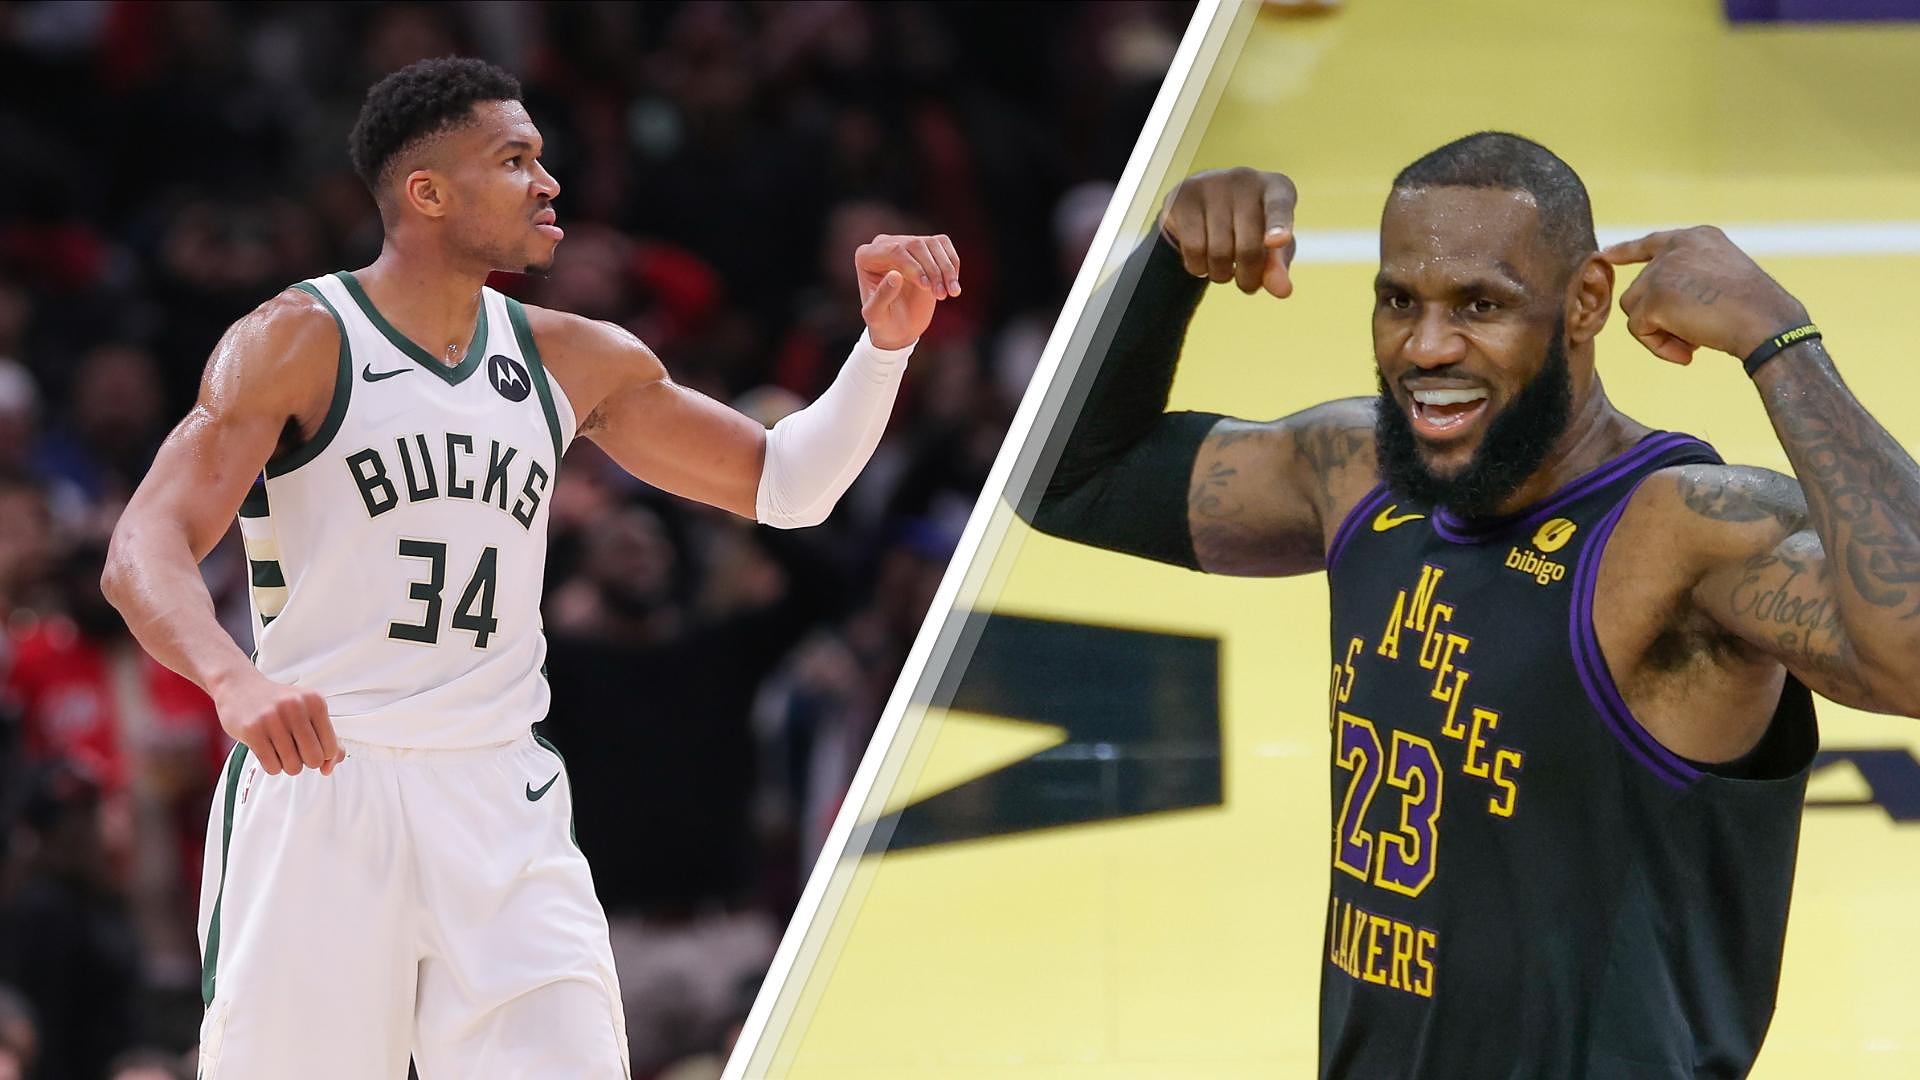 NBA: Giannis Antetokounmpo and LeBron James in the lead after the first All-Star Game votes